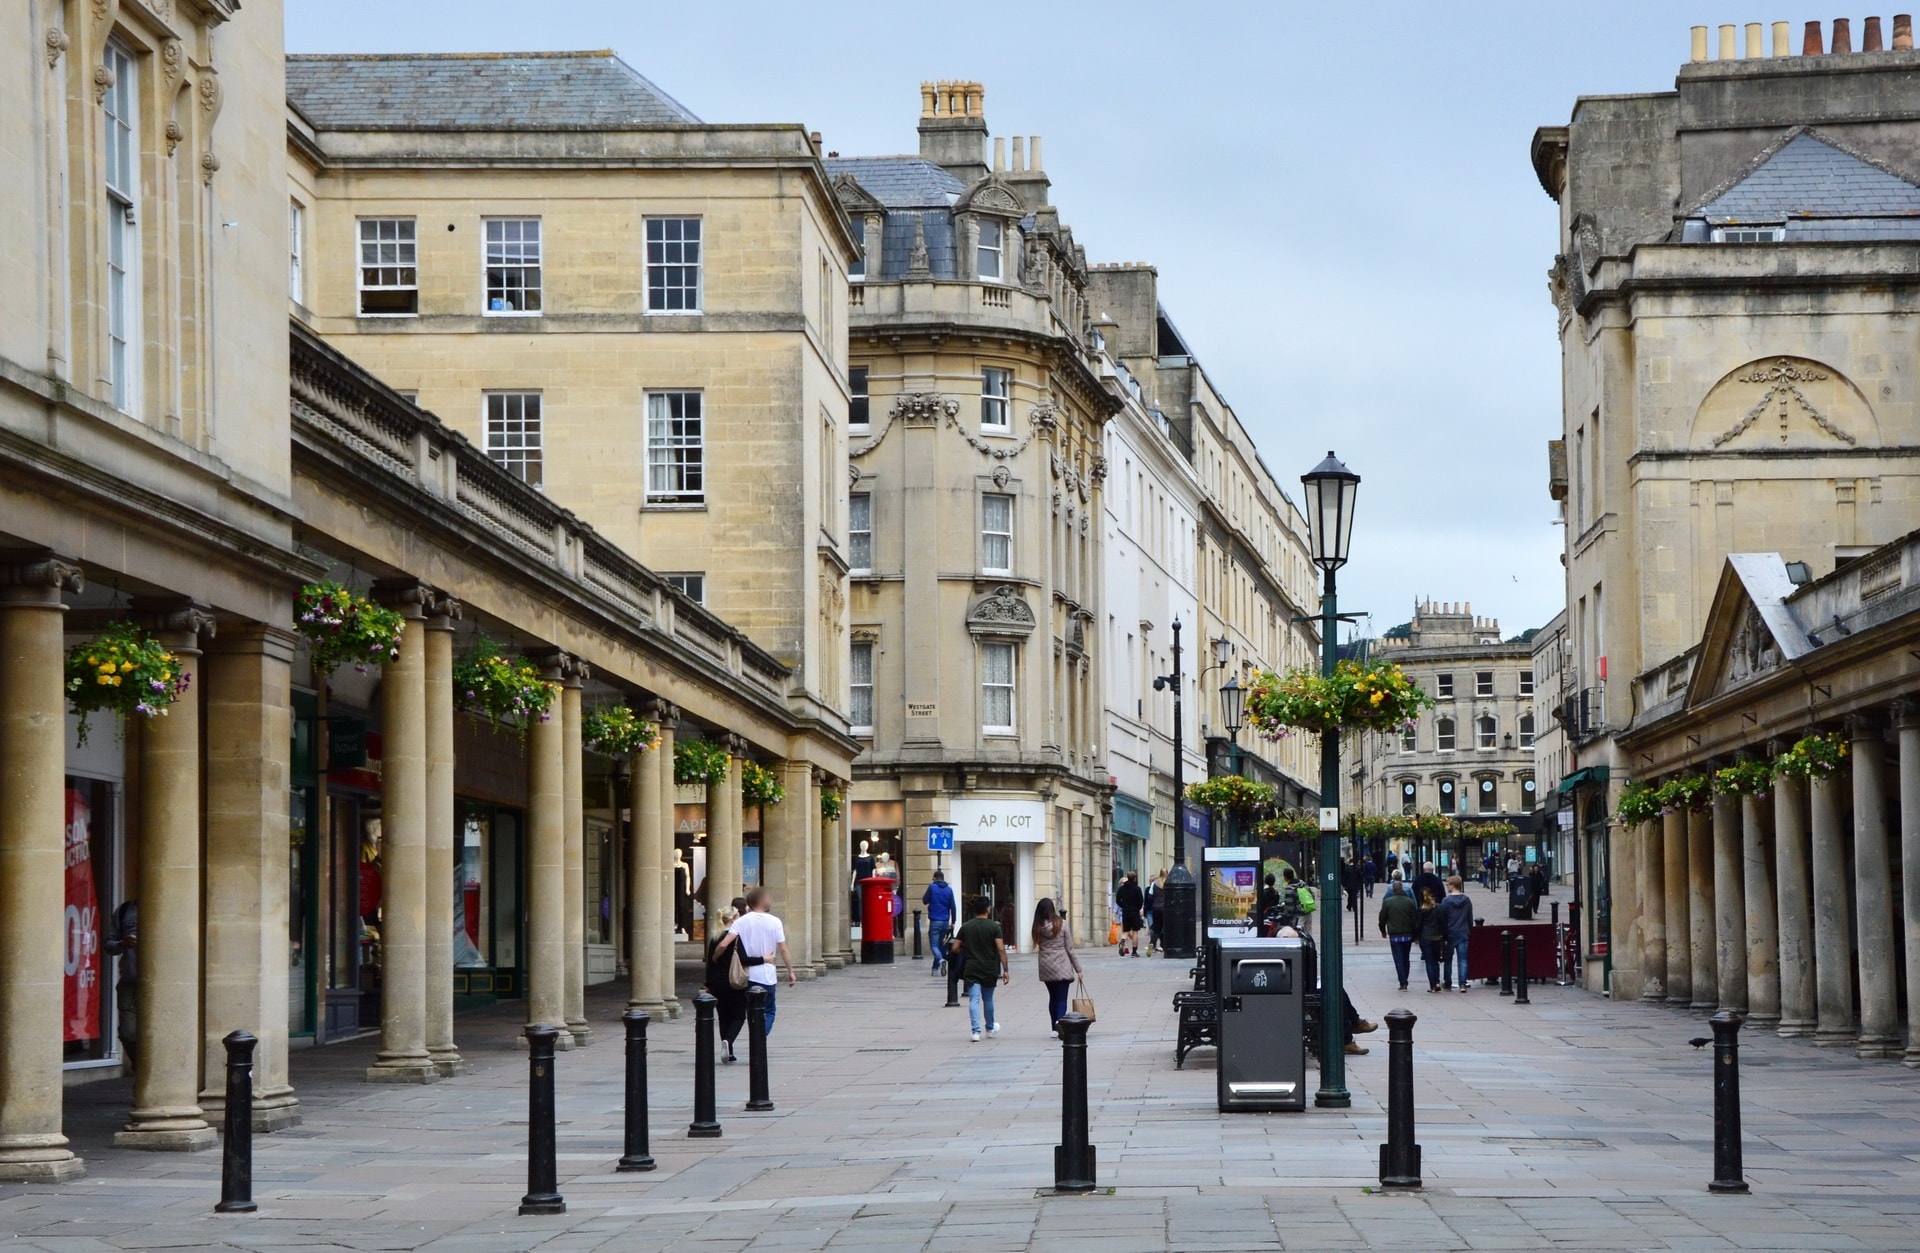 Beautiful Georgian architecture in the streets of Bath